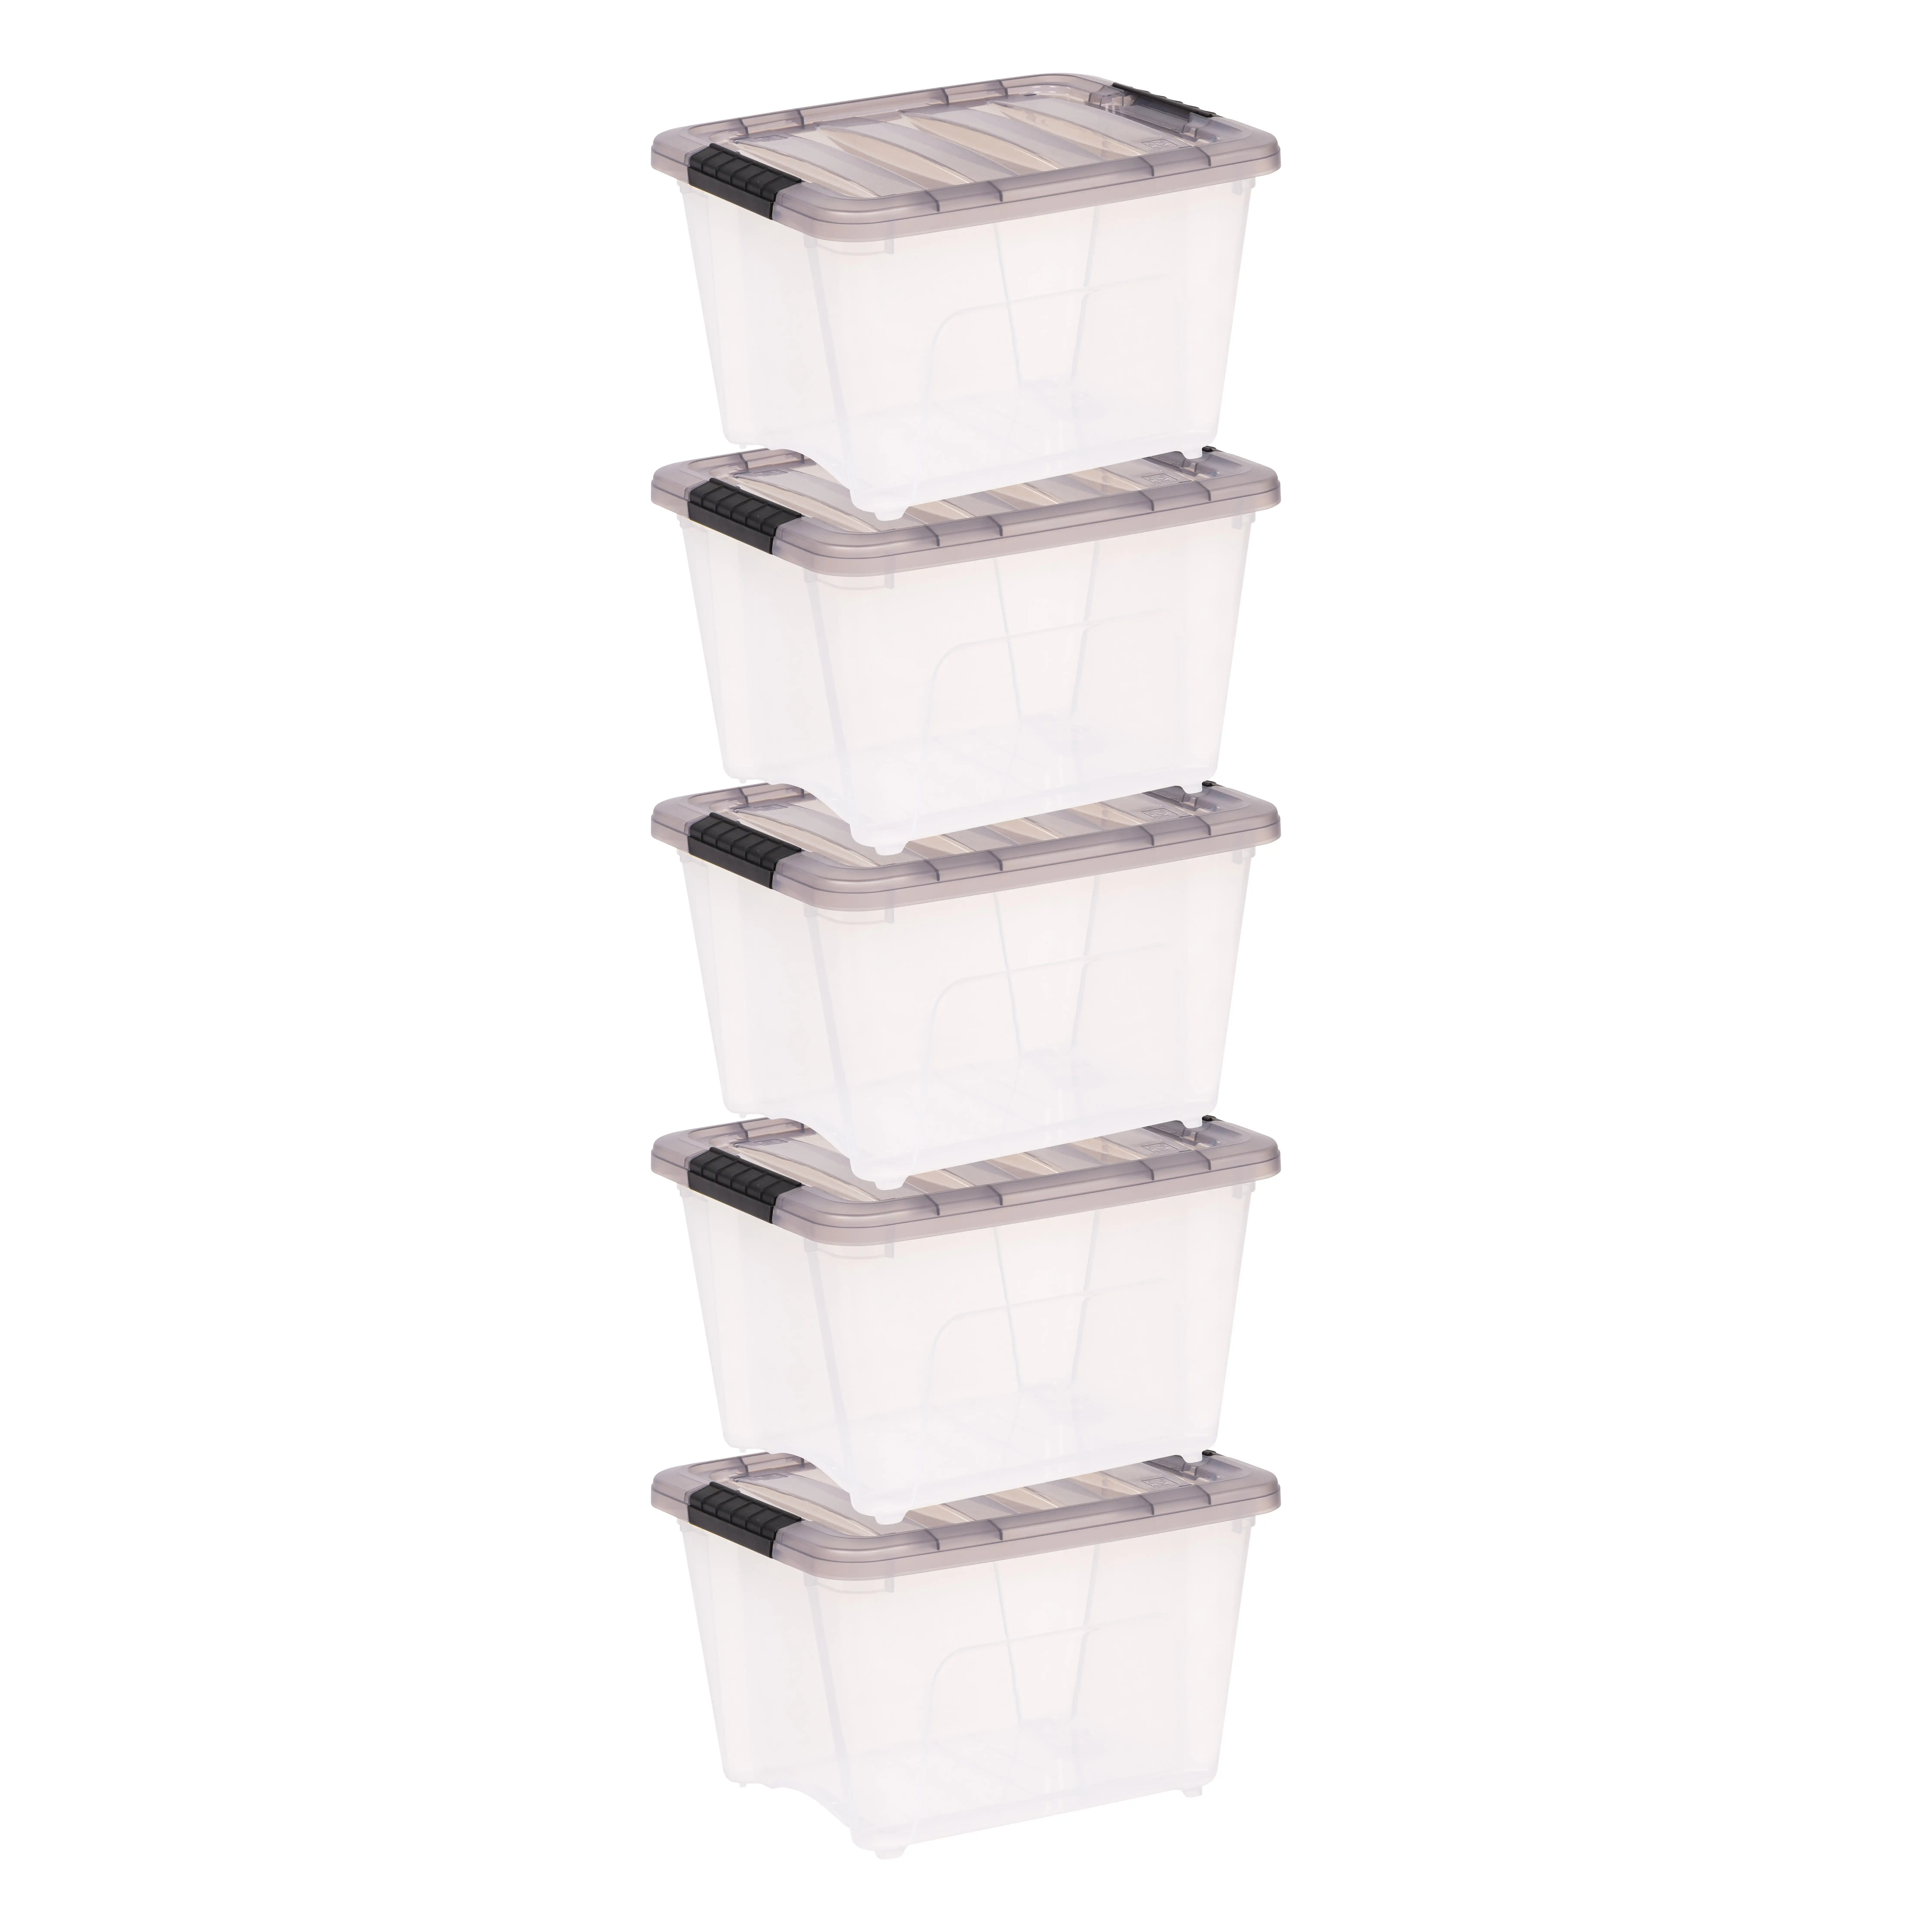 

IRIS USA, 19 Quart Stack & Pull™ Clear Plastic Storage Box with Buckles, Gray, Set of 5